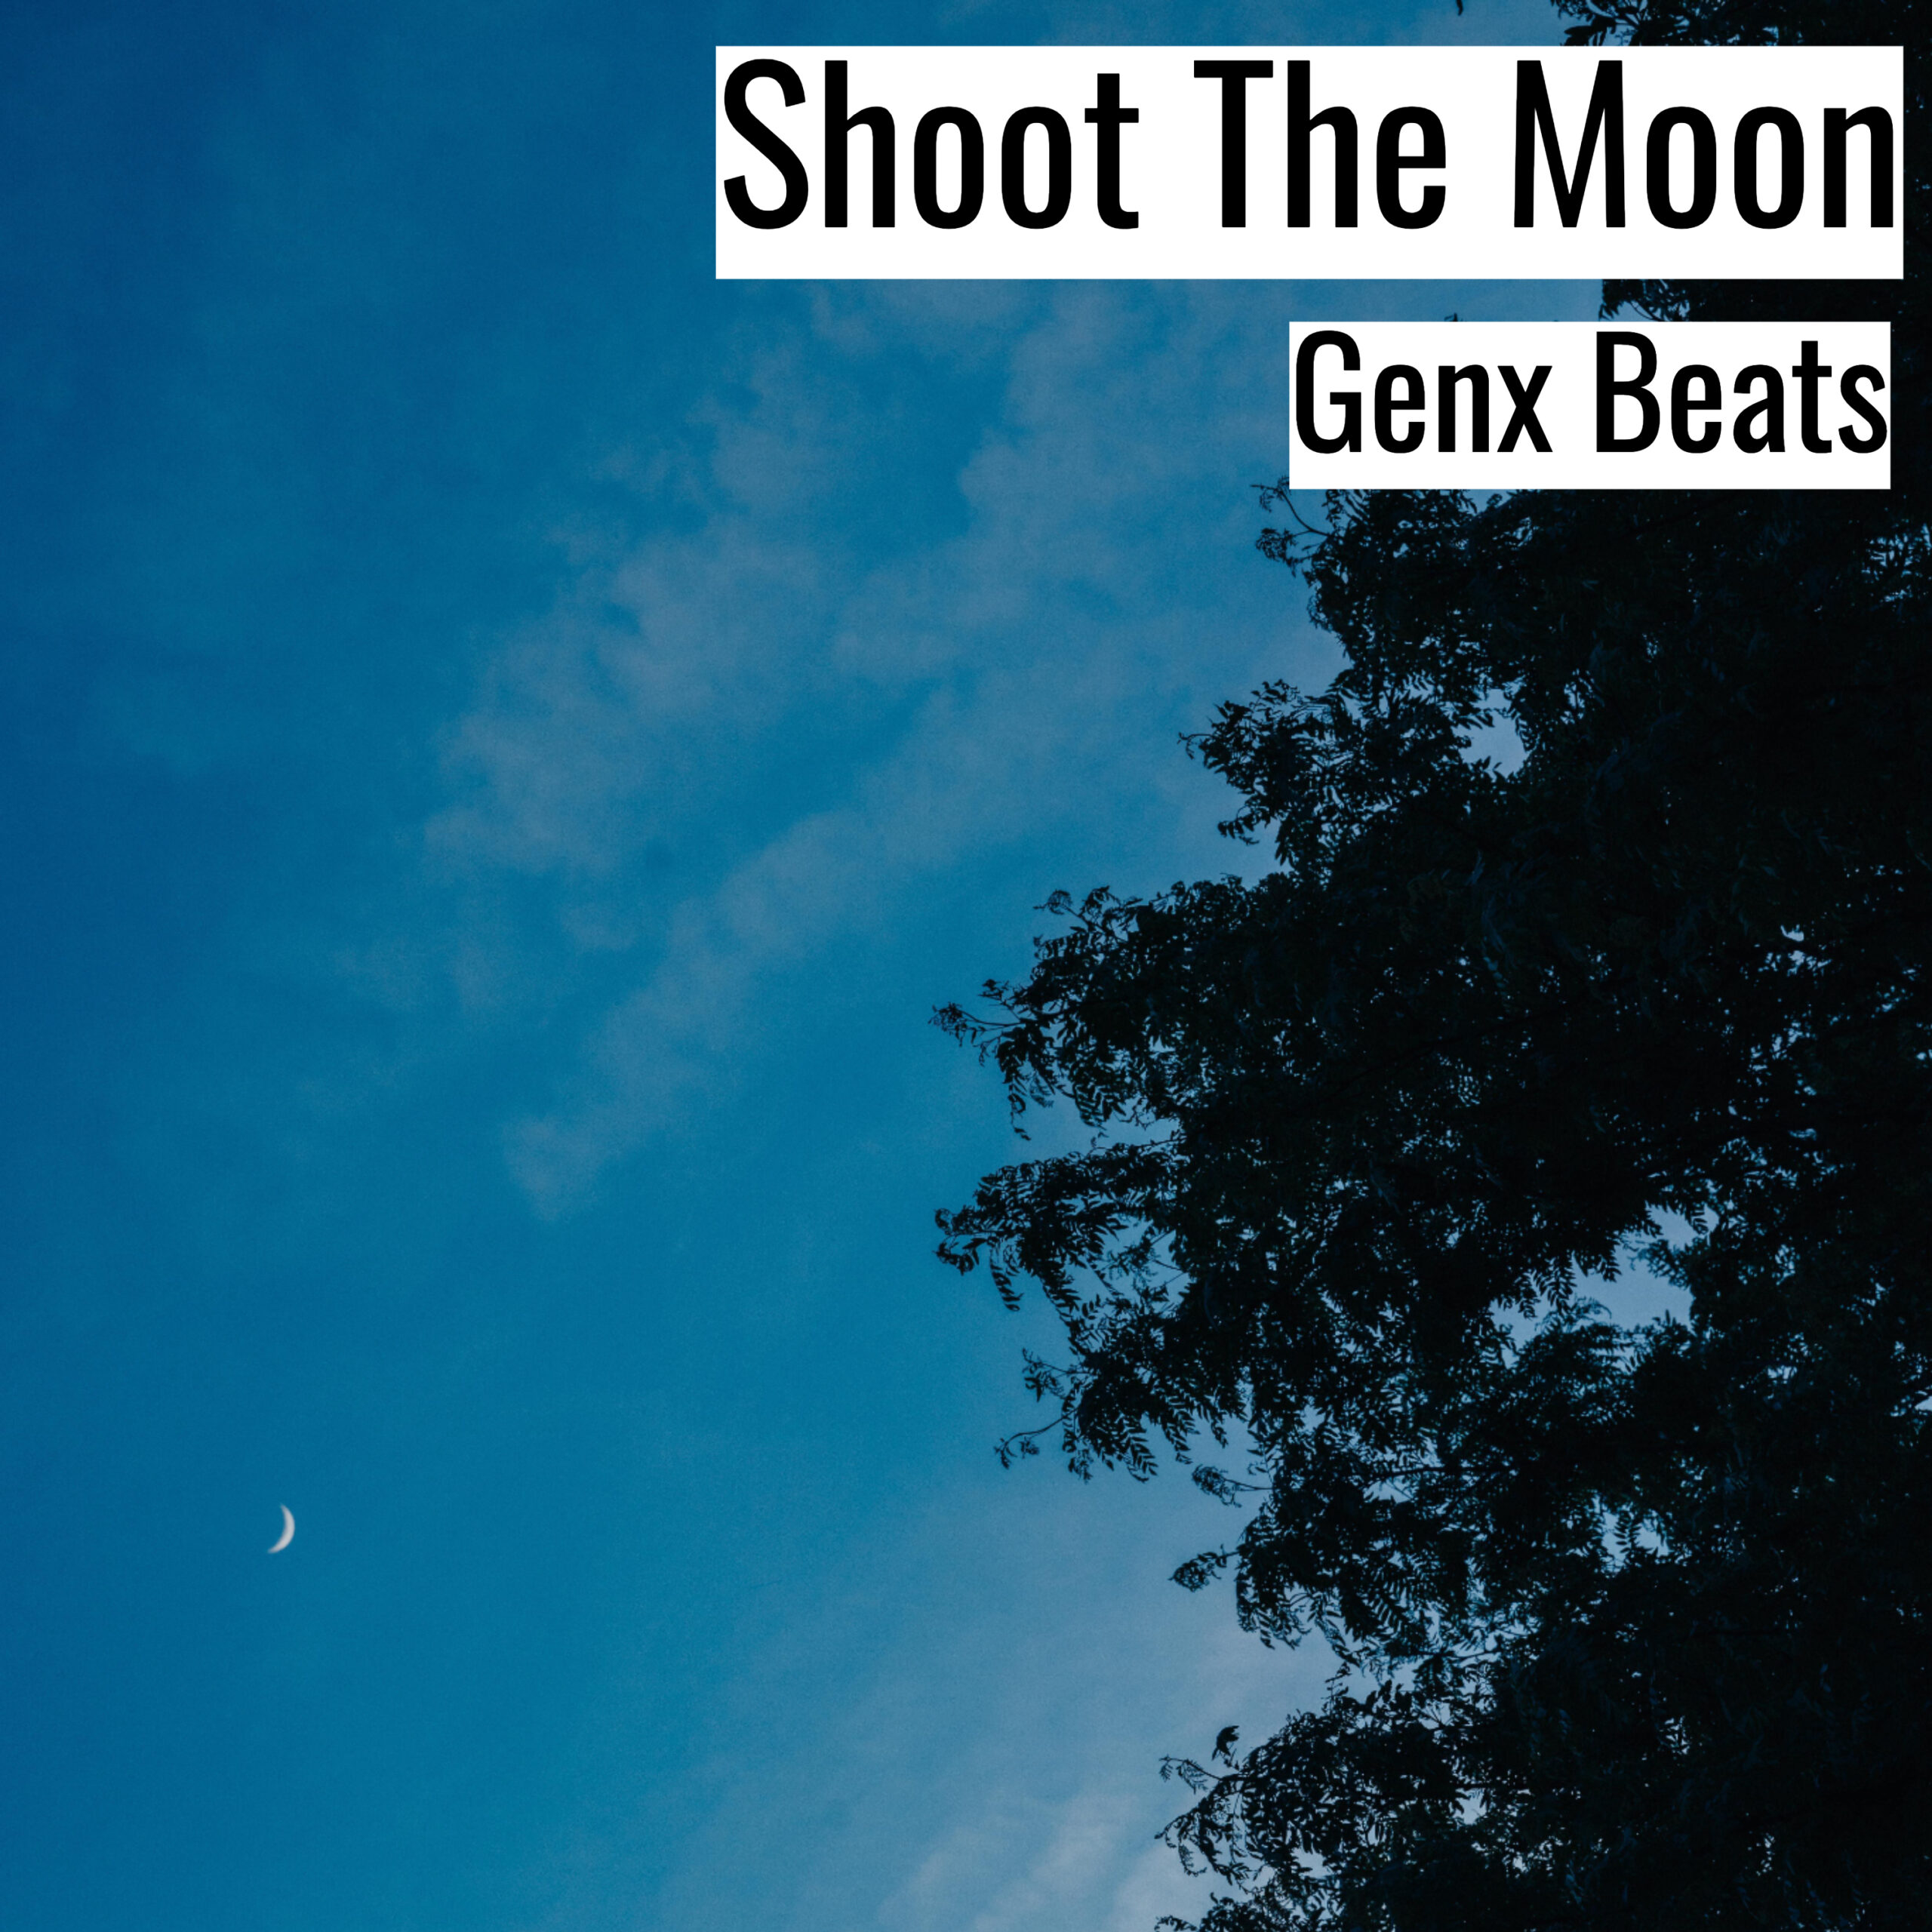 Shoot The Moon scaled